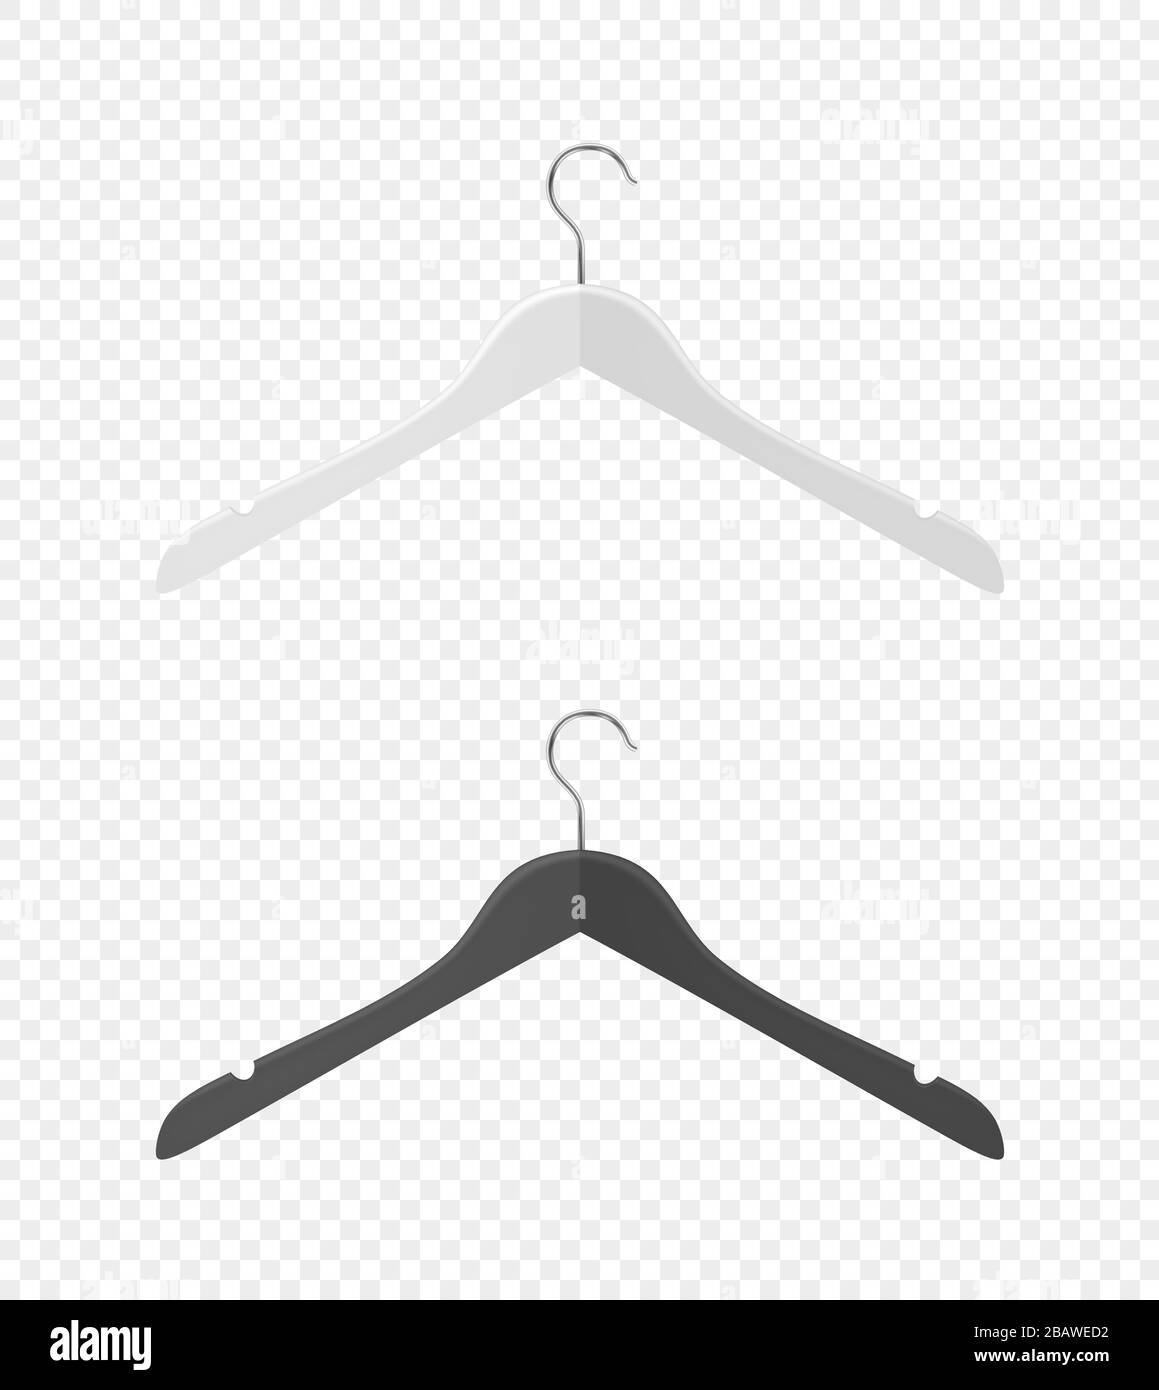 Vector 3d Realistic Clothes Coat Wooden Textured Black, White Hanger Set Closeup Isolated on Transparent Background. Design Template, Clipart or Stock Vector